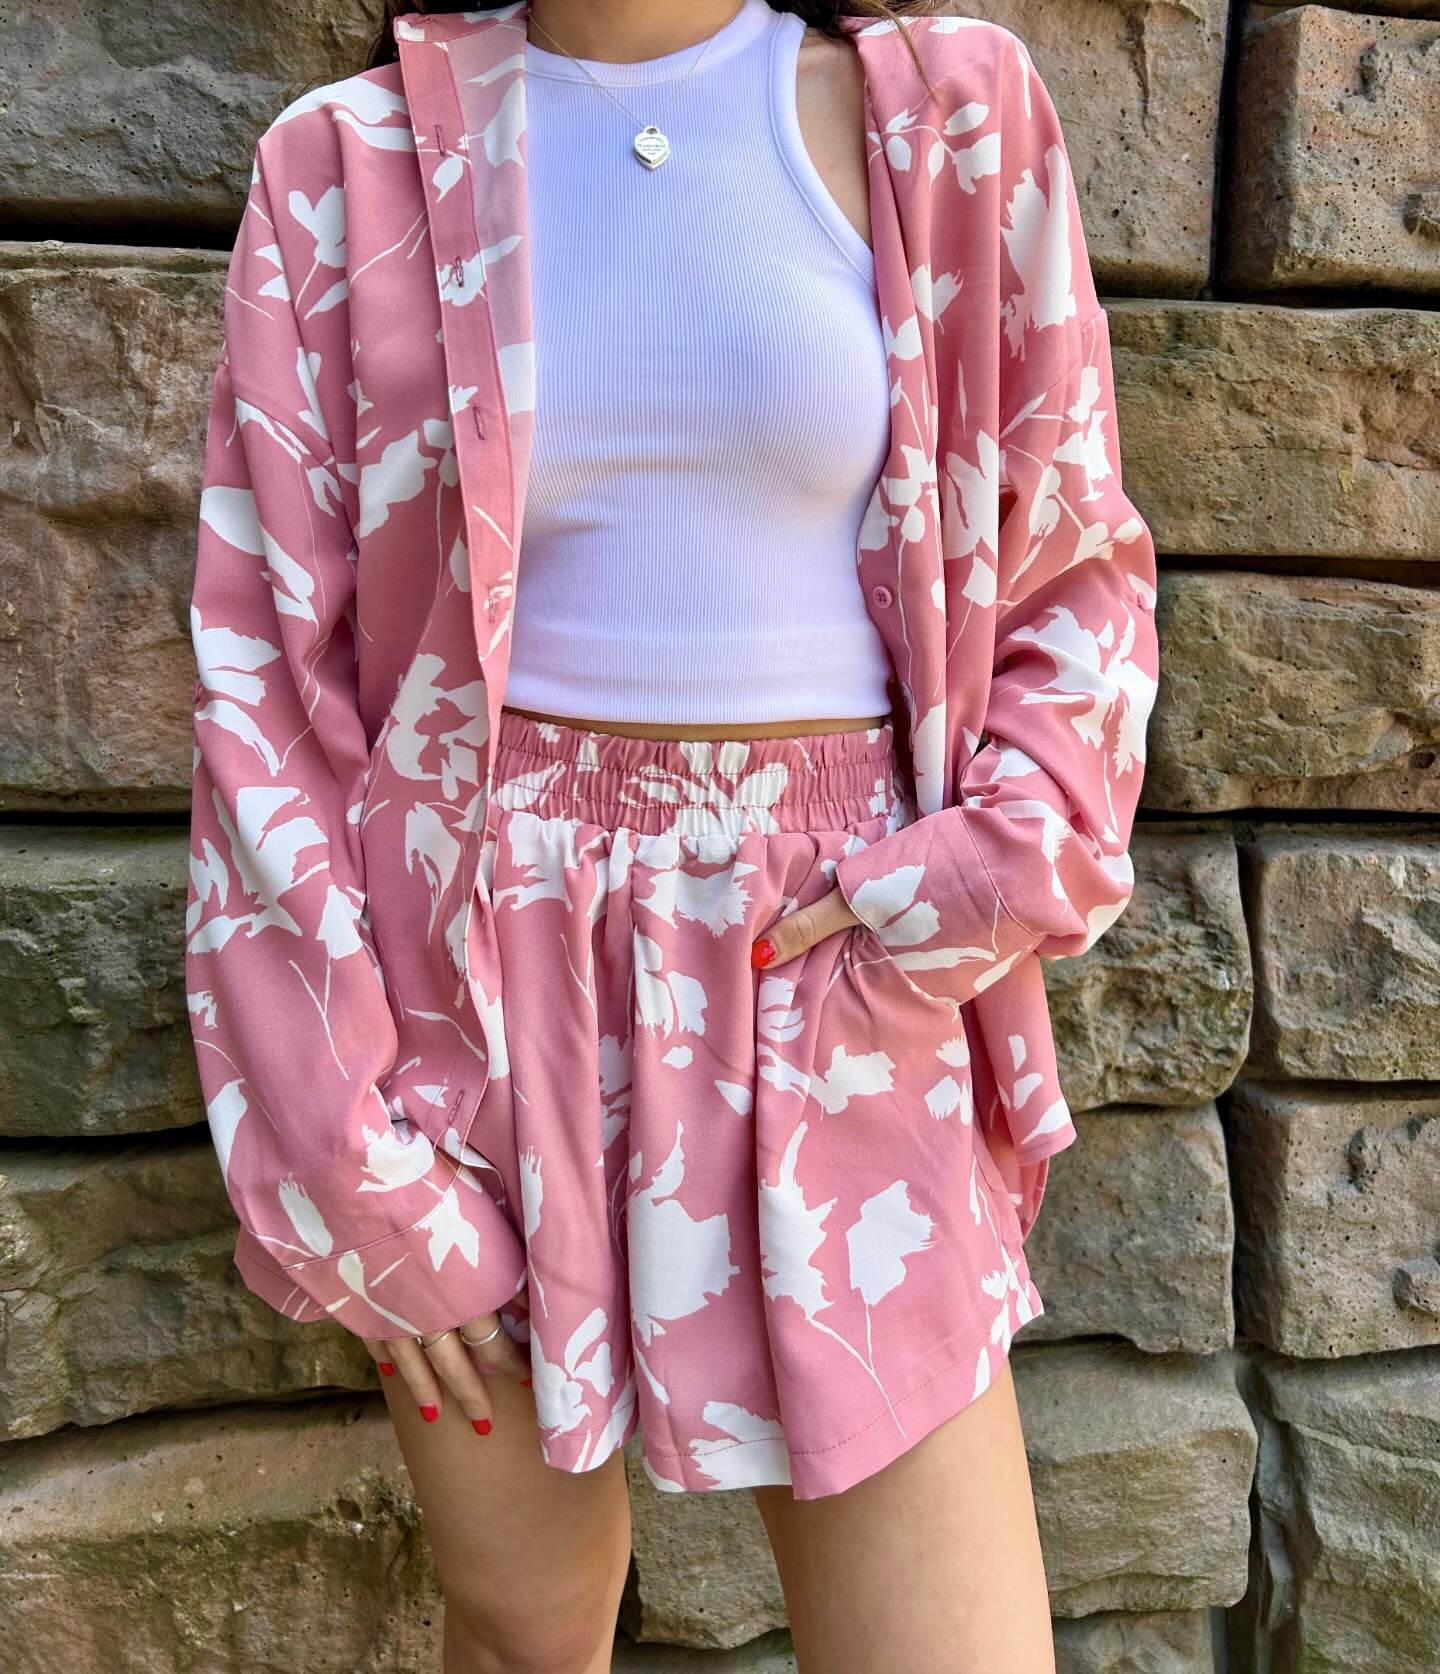 Shop printed matching sets @vanillaskystores though DM or at your local boutique! 🌸🫶 #vanillaskystores ENTIRE STORE 25% off until 5/12